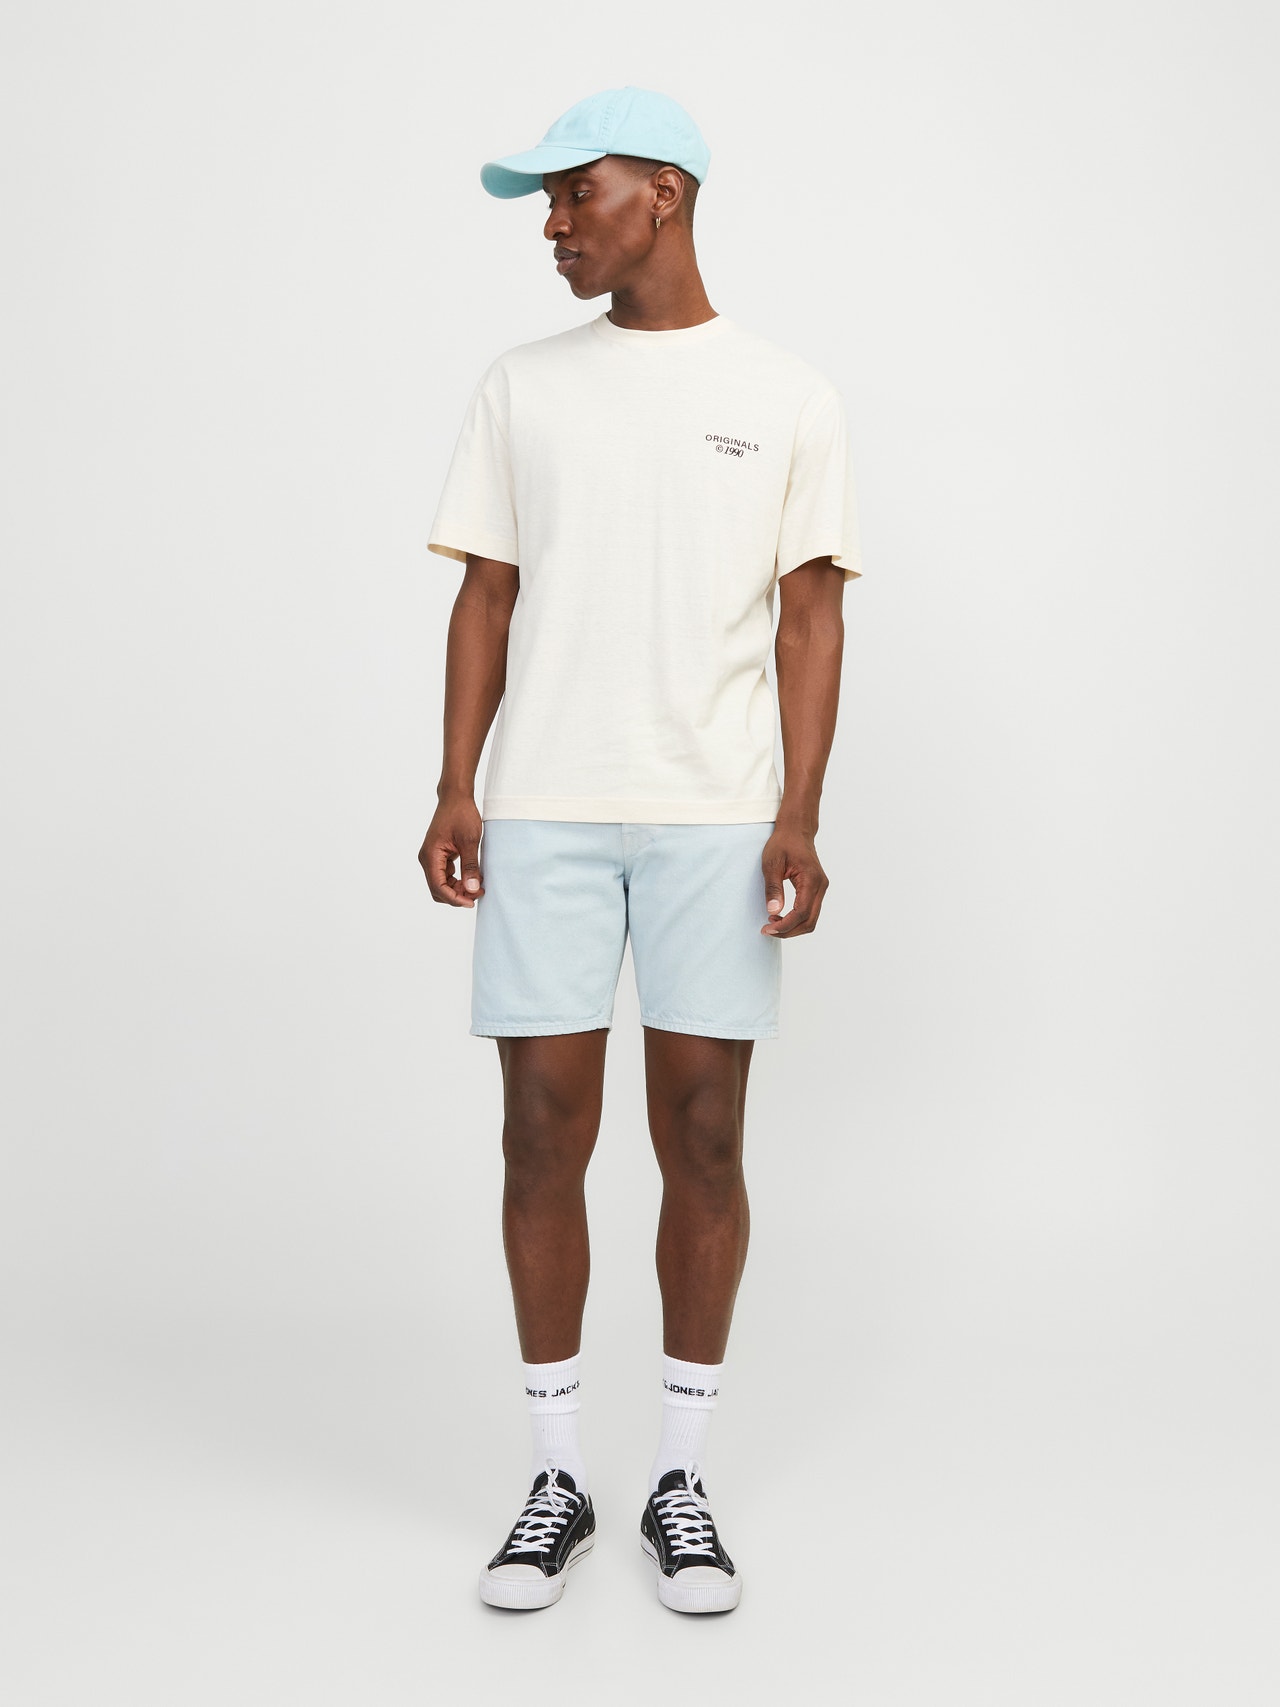 Jack & Jones Relaxed Fit Jeans Shorts -Blue Glow - 12249035